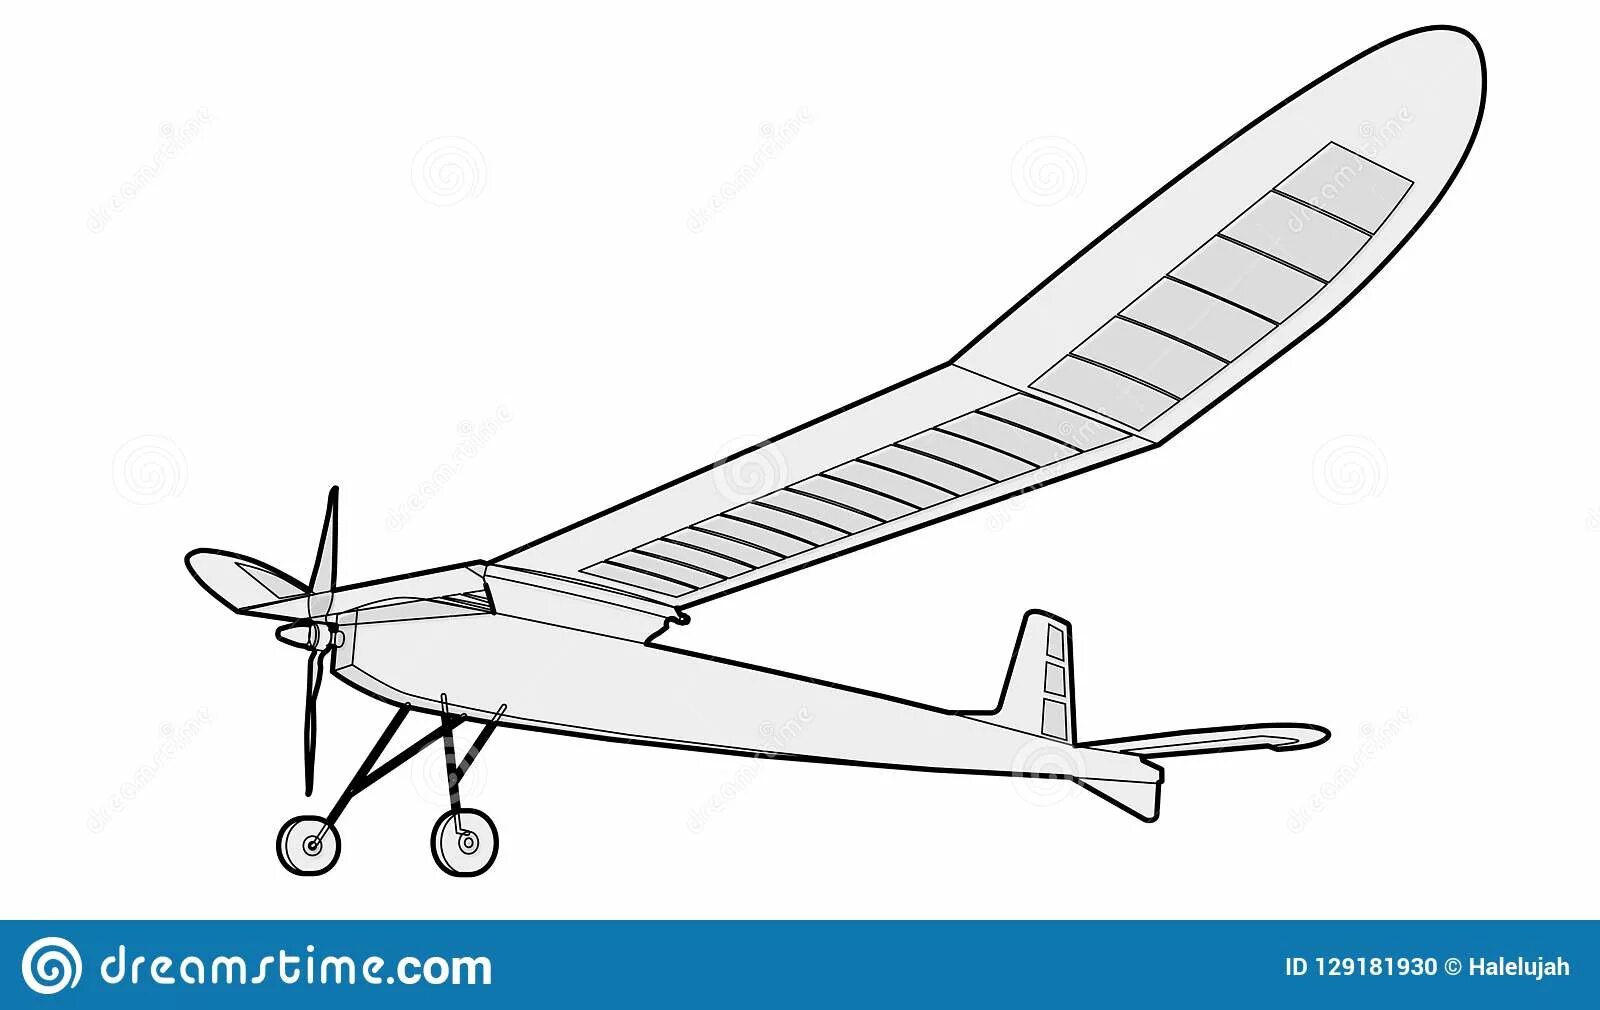 Luxury glider coloring page